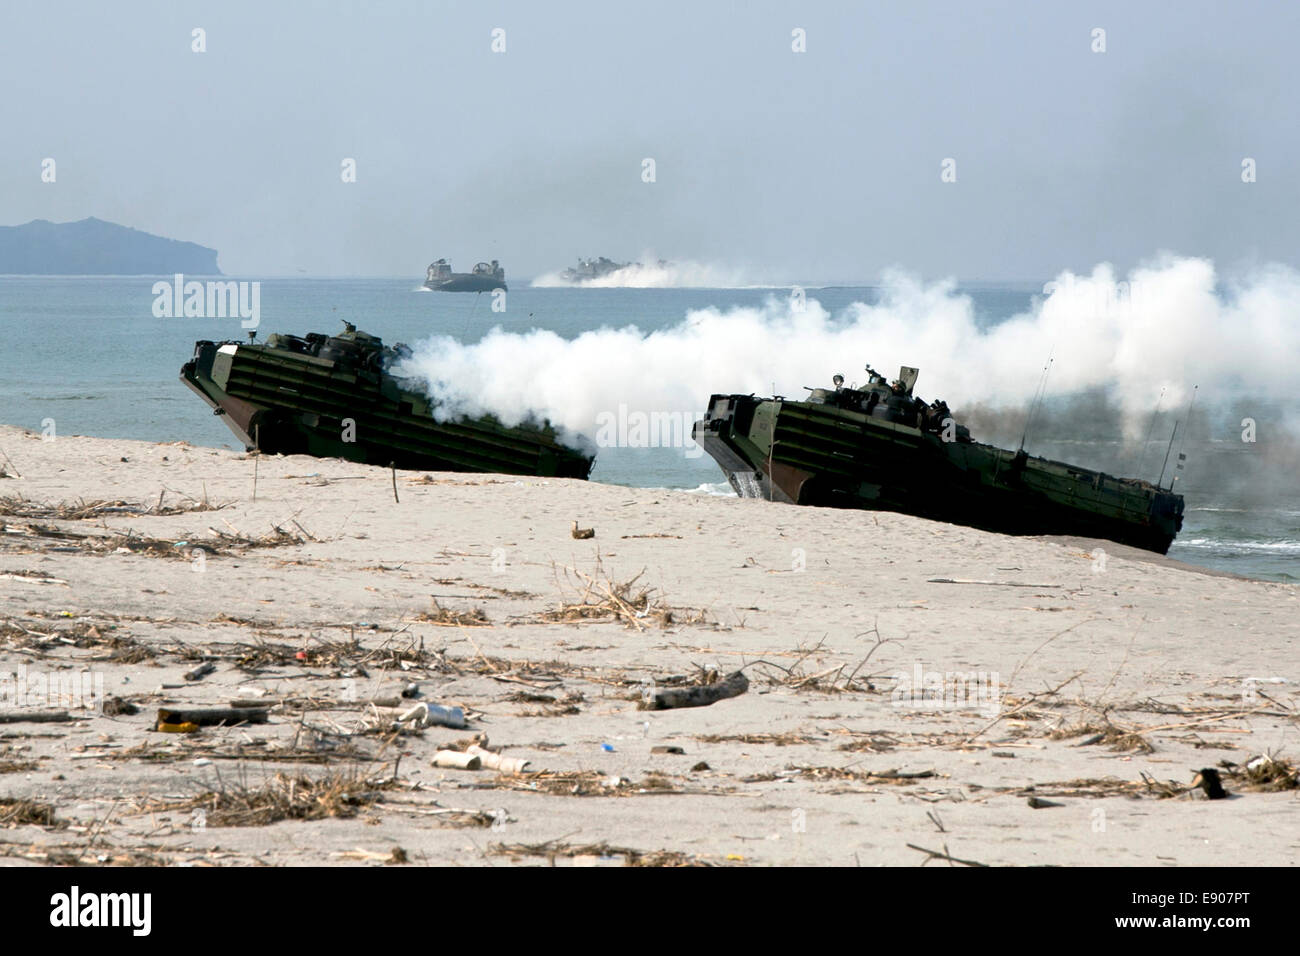 U.S. Marines with India Company, 3rd Battalion, 5th Marine Regiment, 31st Marine Expeditionary Unit and Philippine marines arrive at a beach during a mechanized assault as part of Amphibious Landing Exercise (PHIBLEX) 15 in Zambales, Luzon, Philippines, O Stock Photo